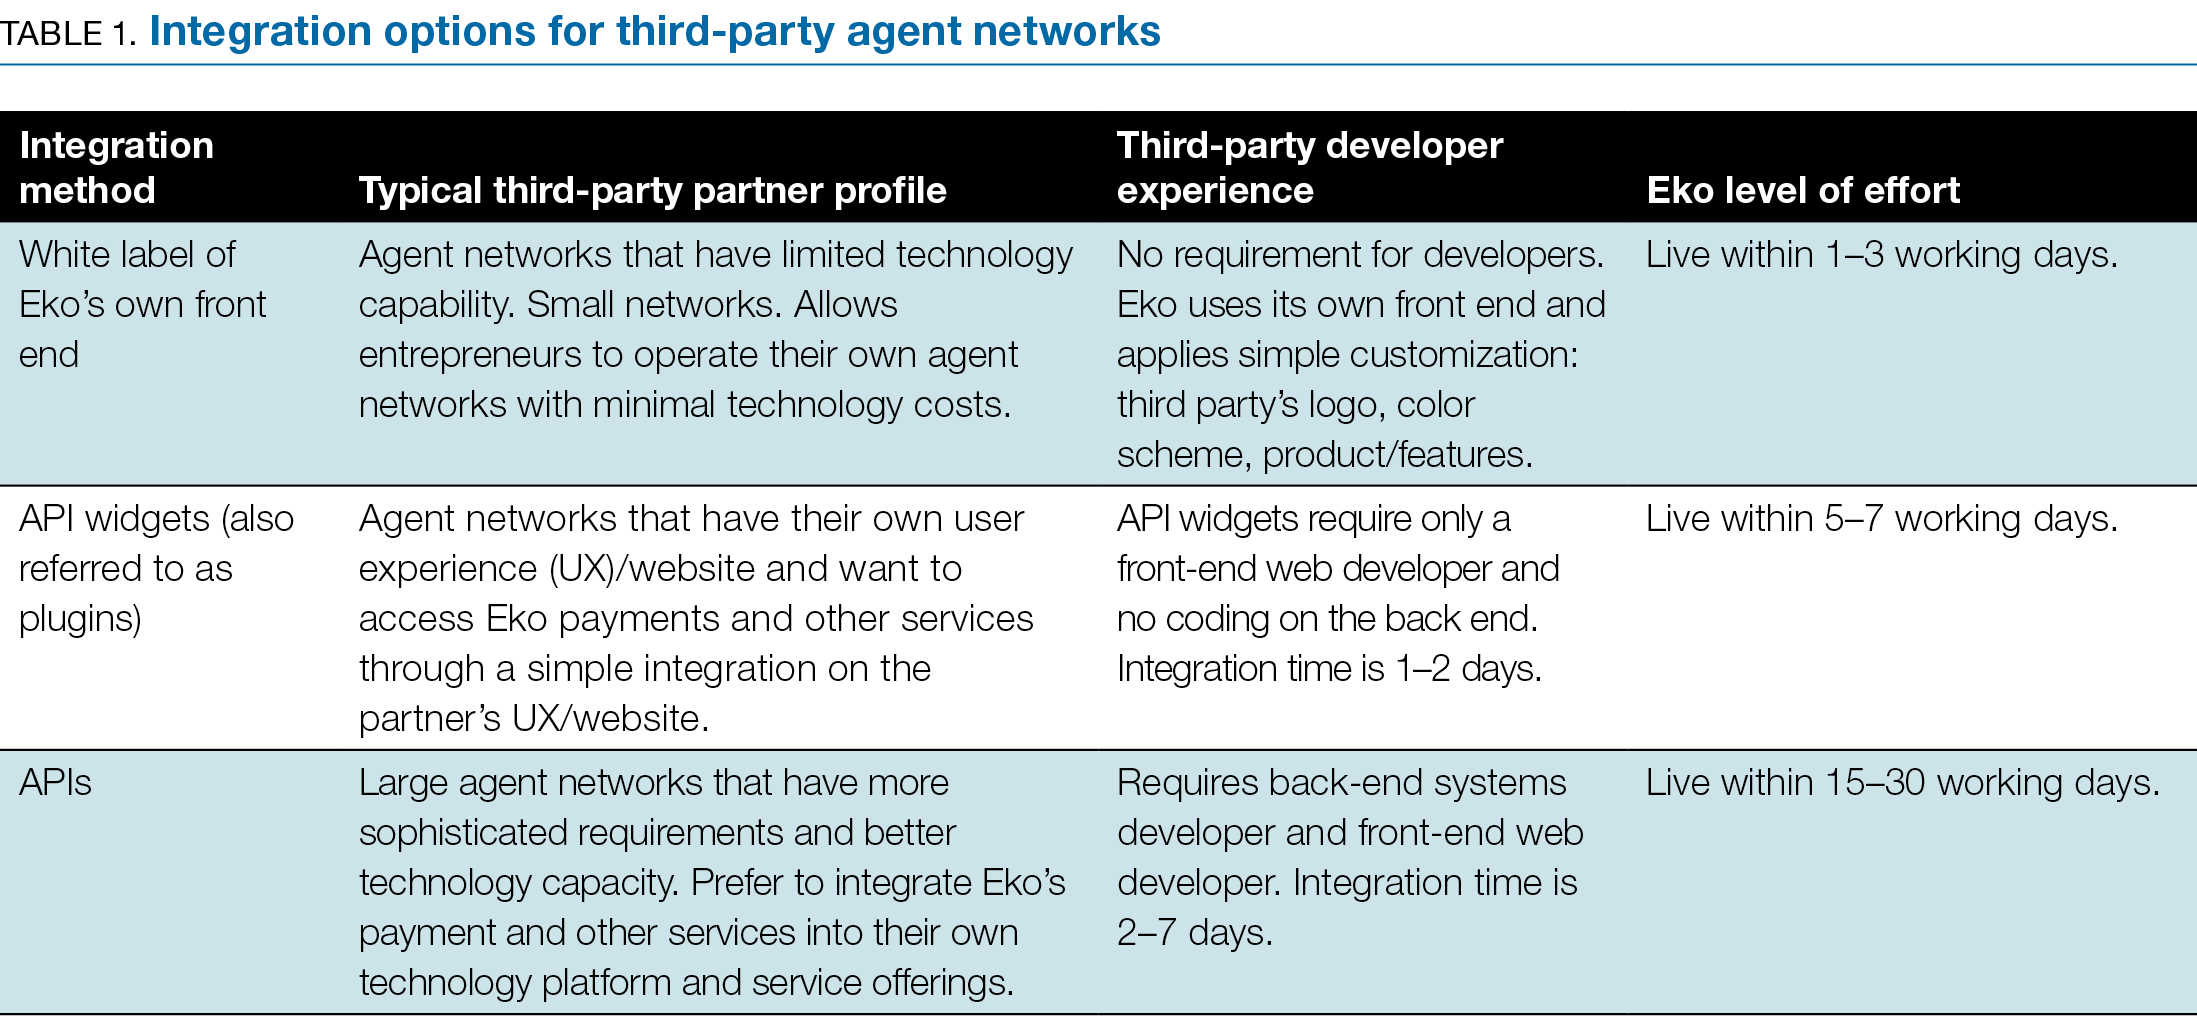 TABLE 1. Integration options for third-party agent networks